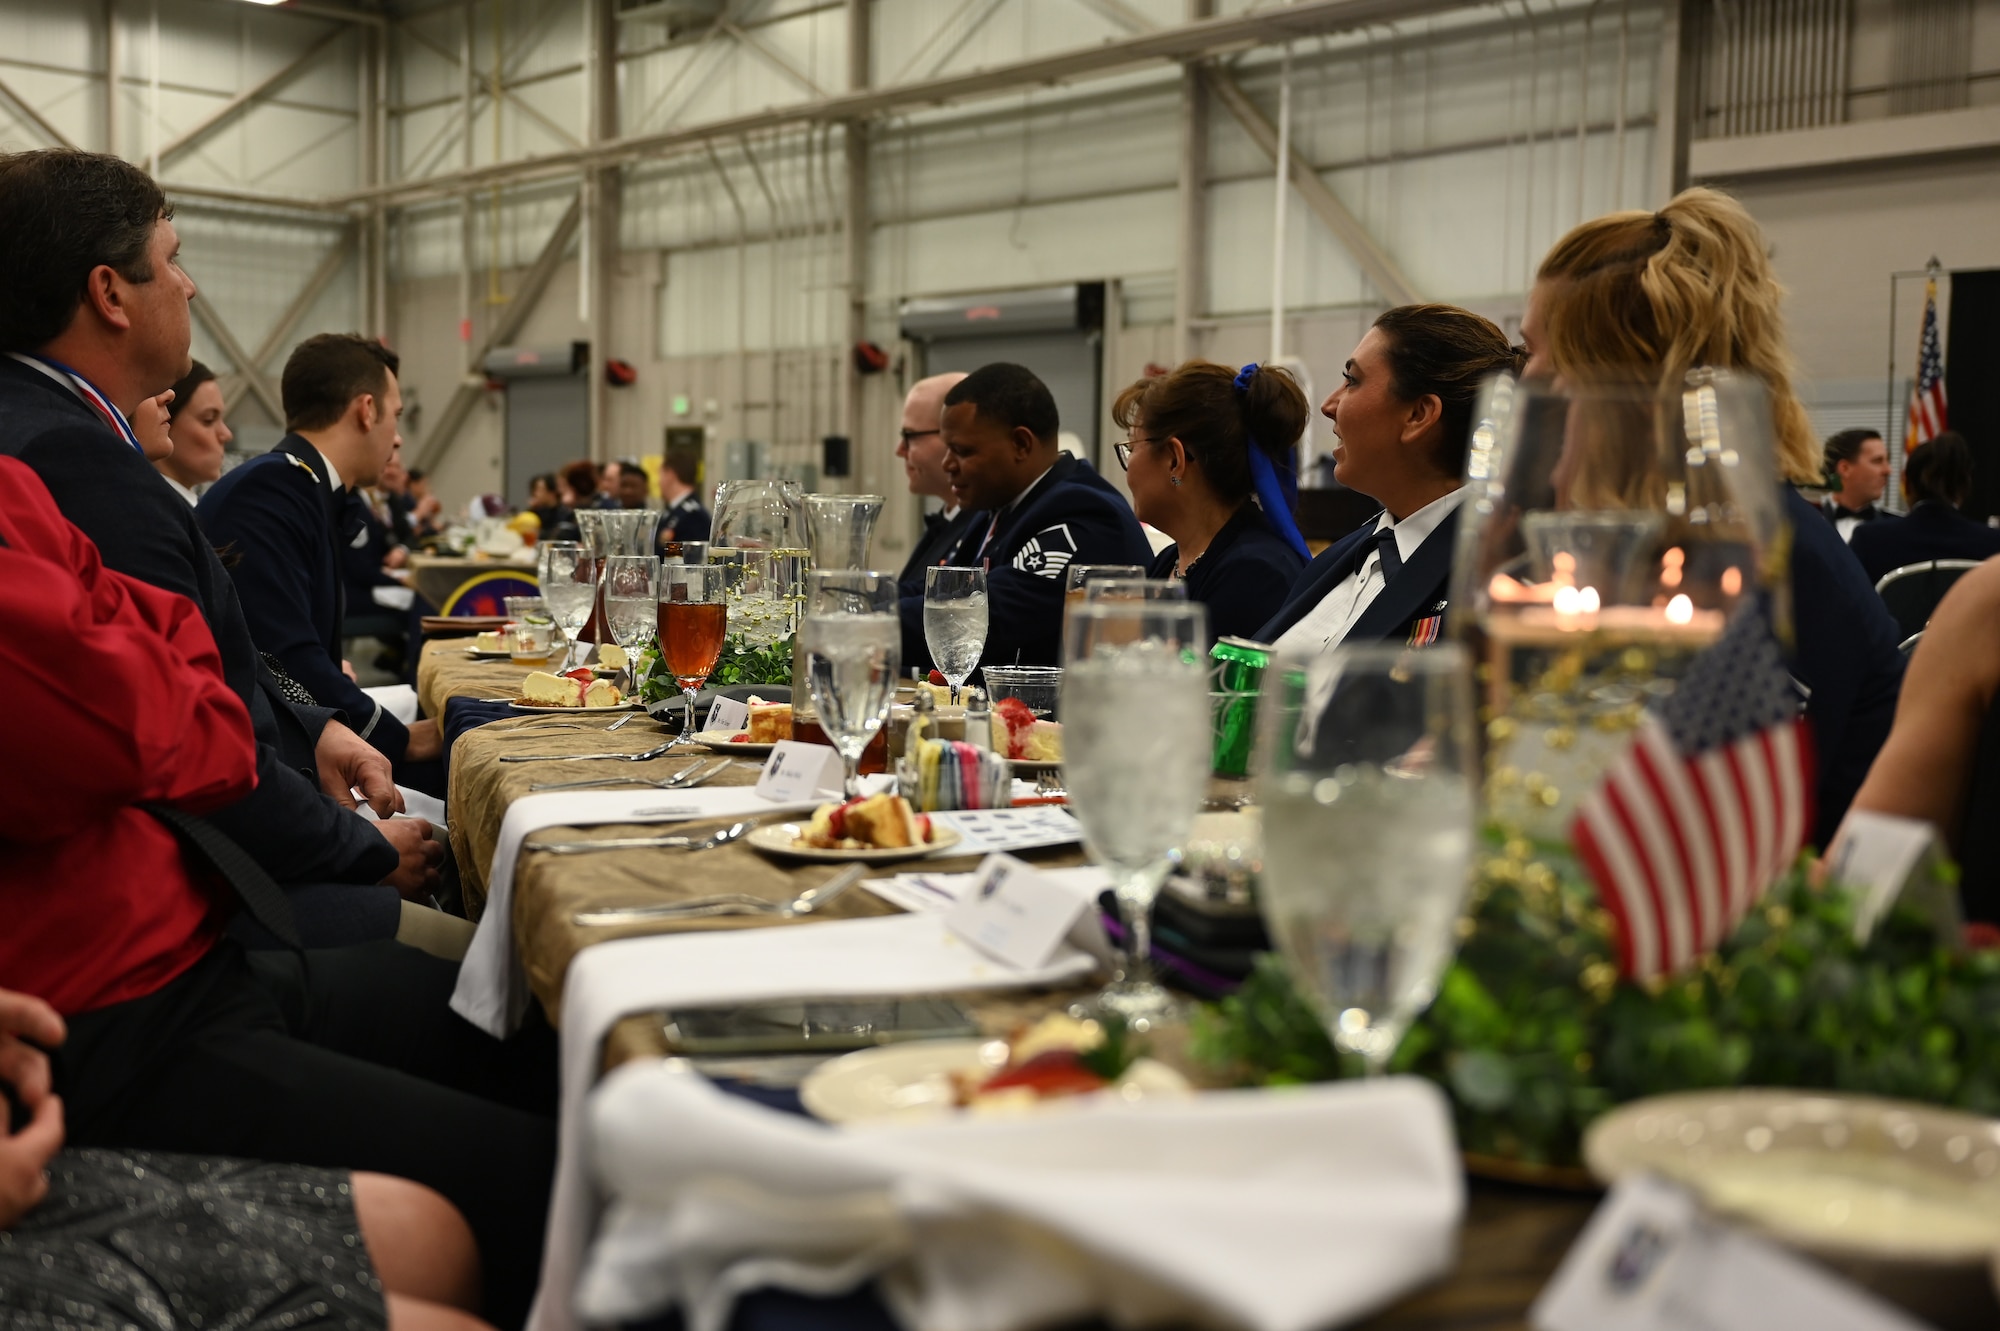 Attendees from the 14th Flying Training Wing listen to the Master of Ceremony, during the Annual Awards and Dining Out Ceremony, Feburary 12, 2022, on Columbus Air Force Base, Miss. Annual Awards Ceremonies are used as a way to show appreciation to base personnel for their hard work and dedication toward the mission, throughout the year. (U.S. Air Force Photo by Second Lieutenant Peyton Craven)